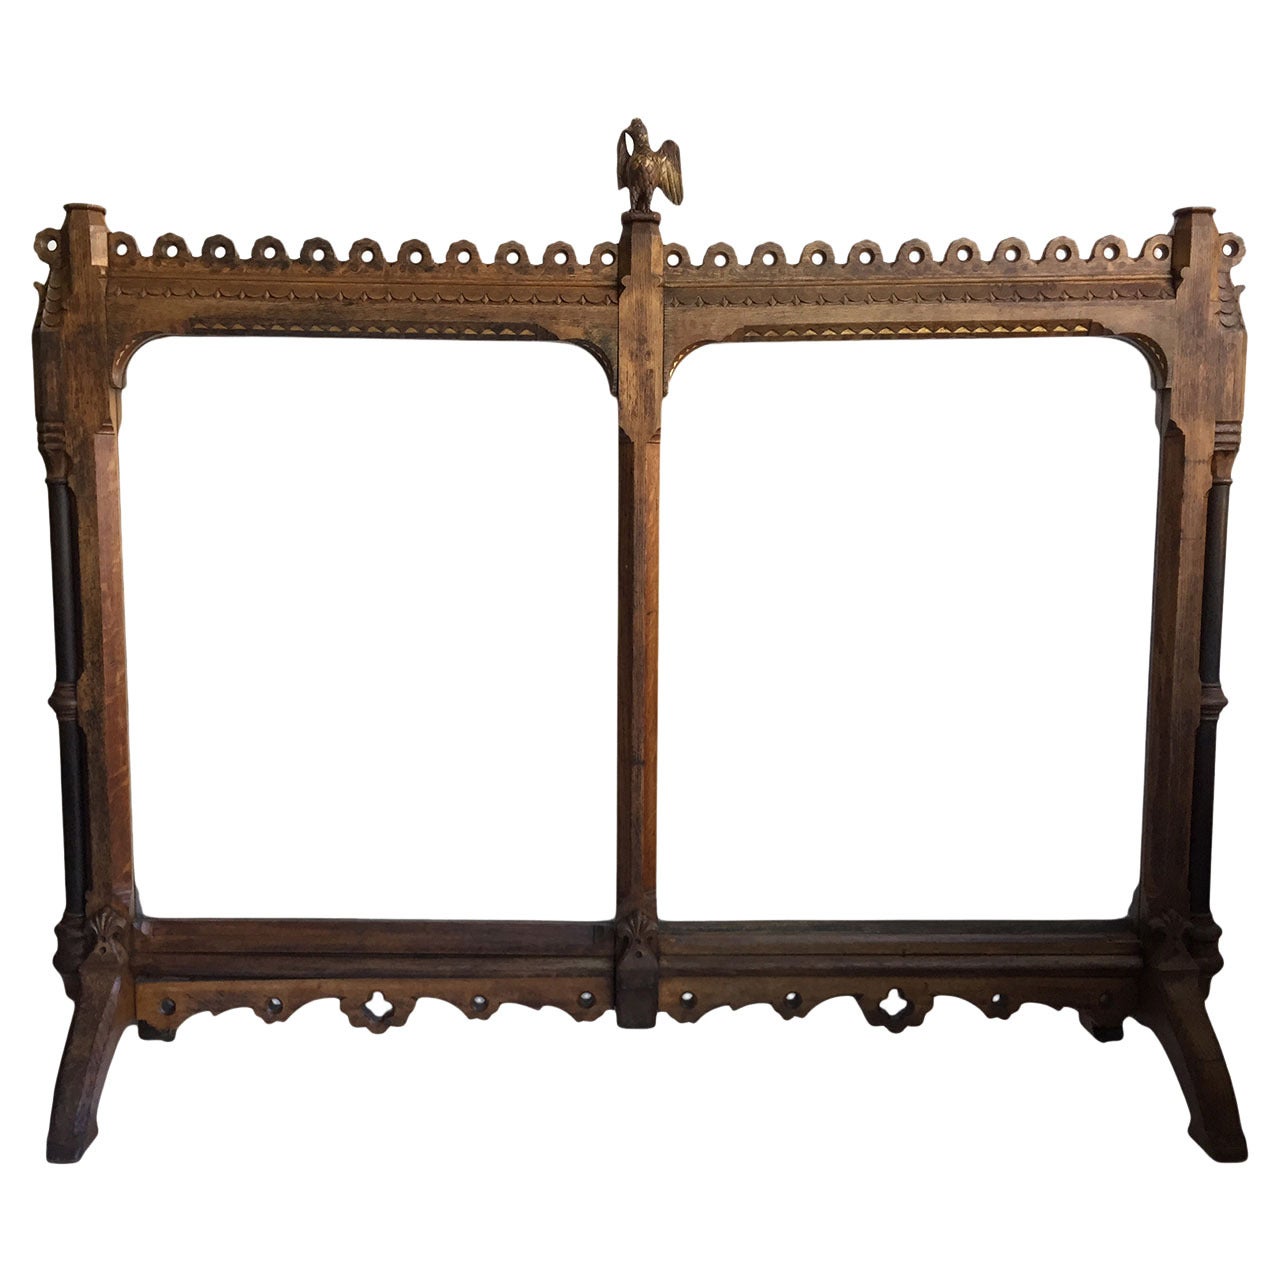 19th Century Arts and Crafts Screen